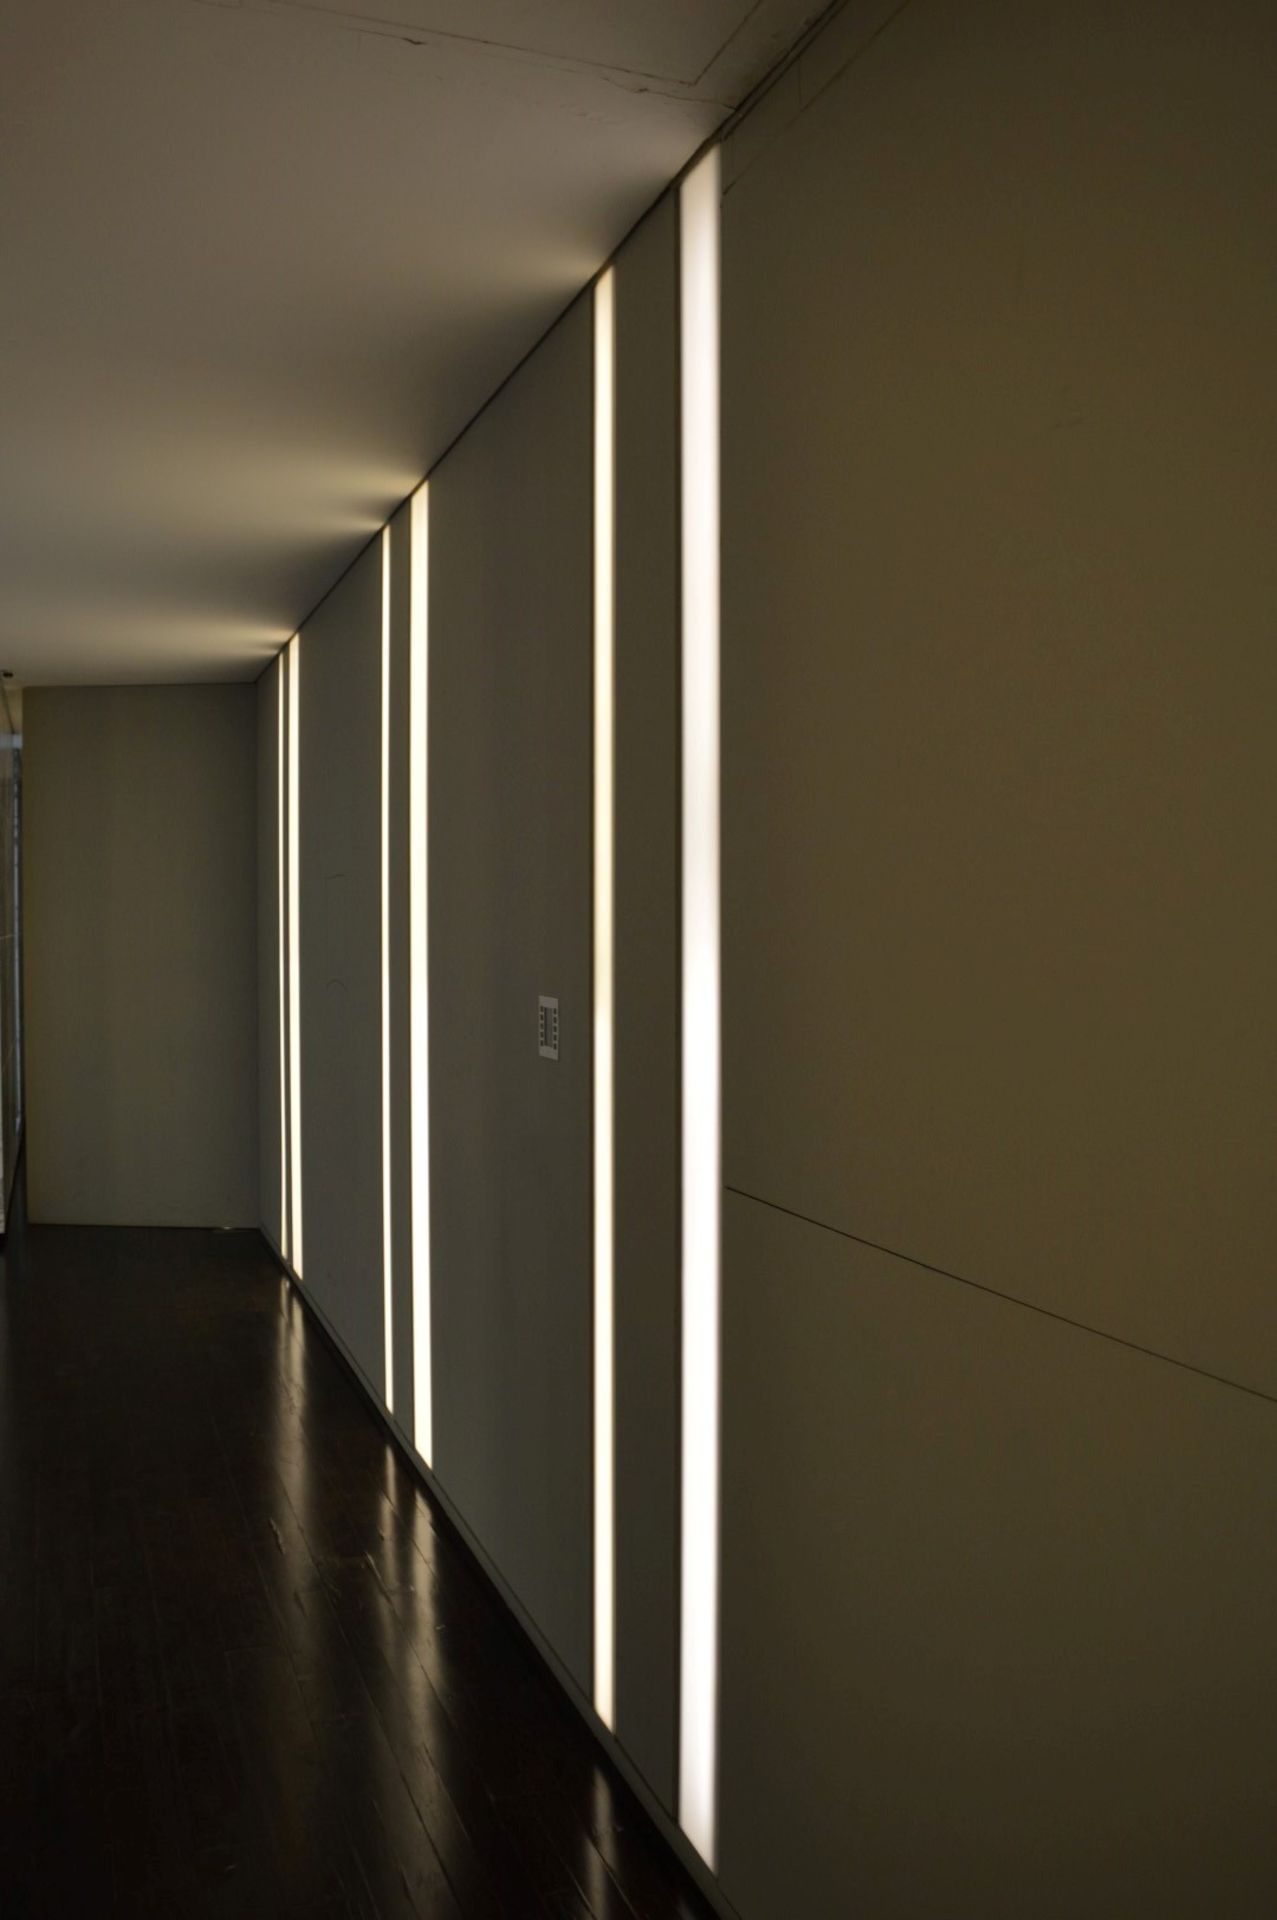 17 x Recessed Wall Light Fittings - Includes 34 x Tridonic Ballasts, Approx 68 x Tube Lights and - Image 11 of 15